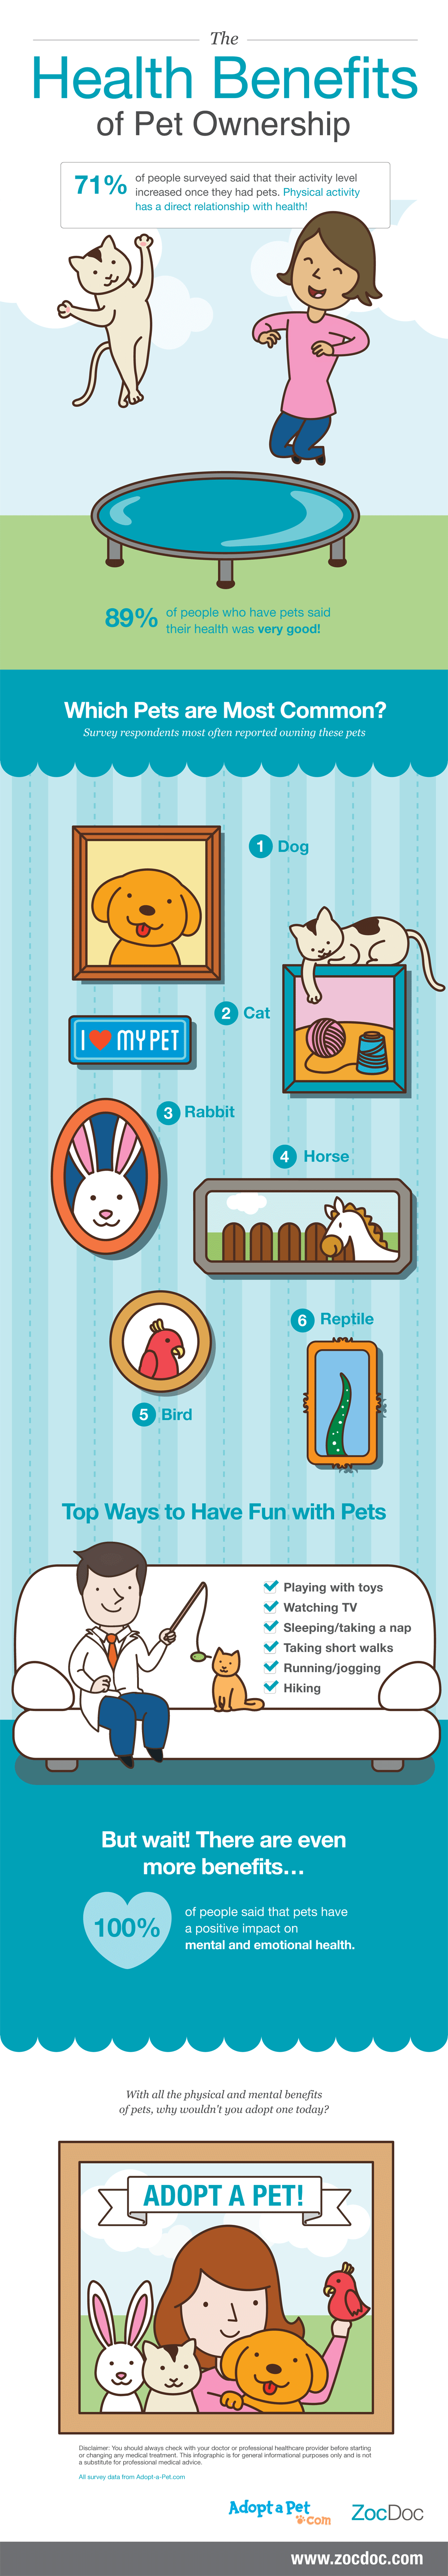 The Health Benefits Of Pet Ownership Infographic